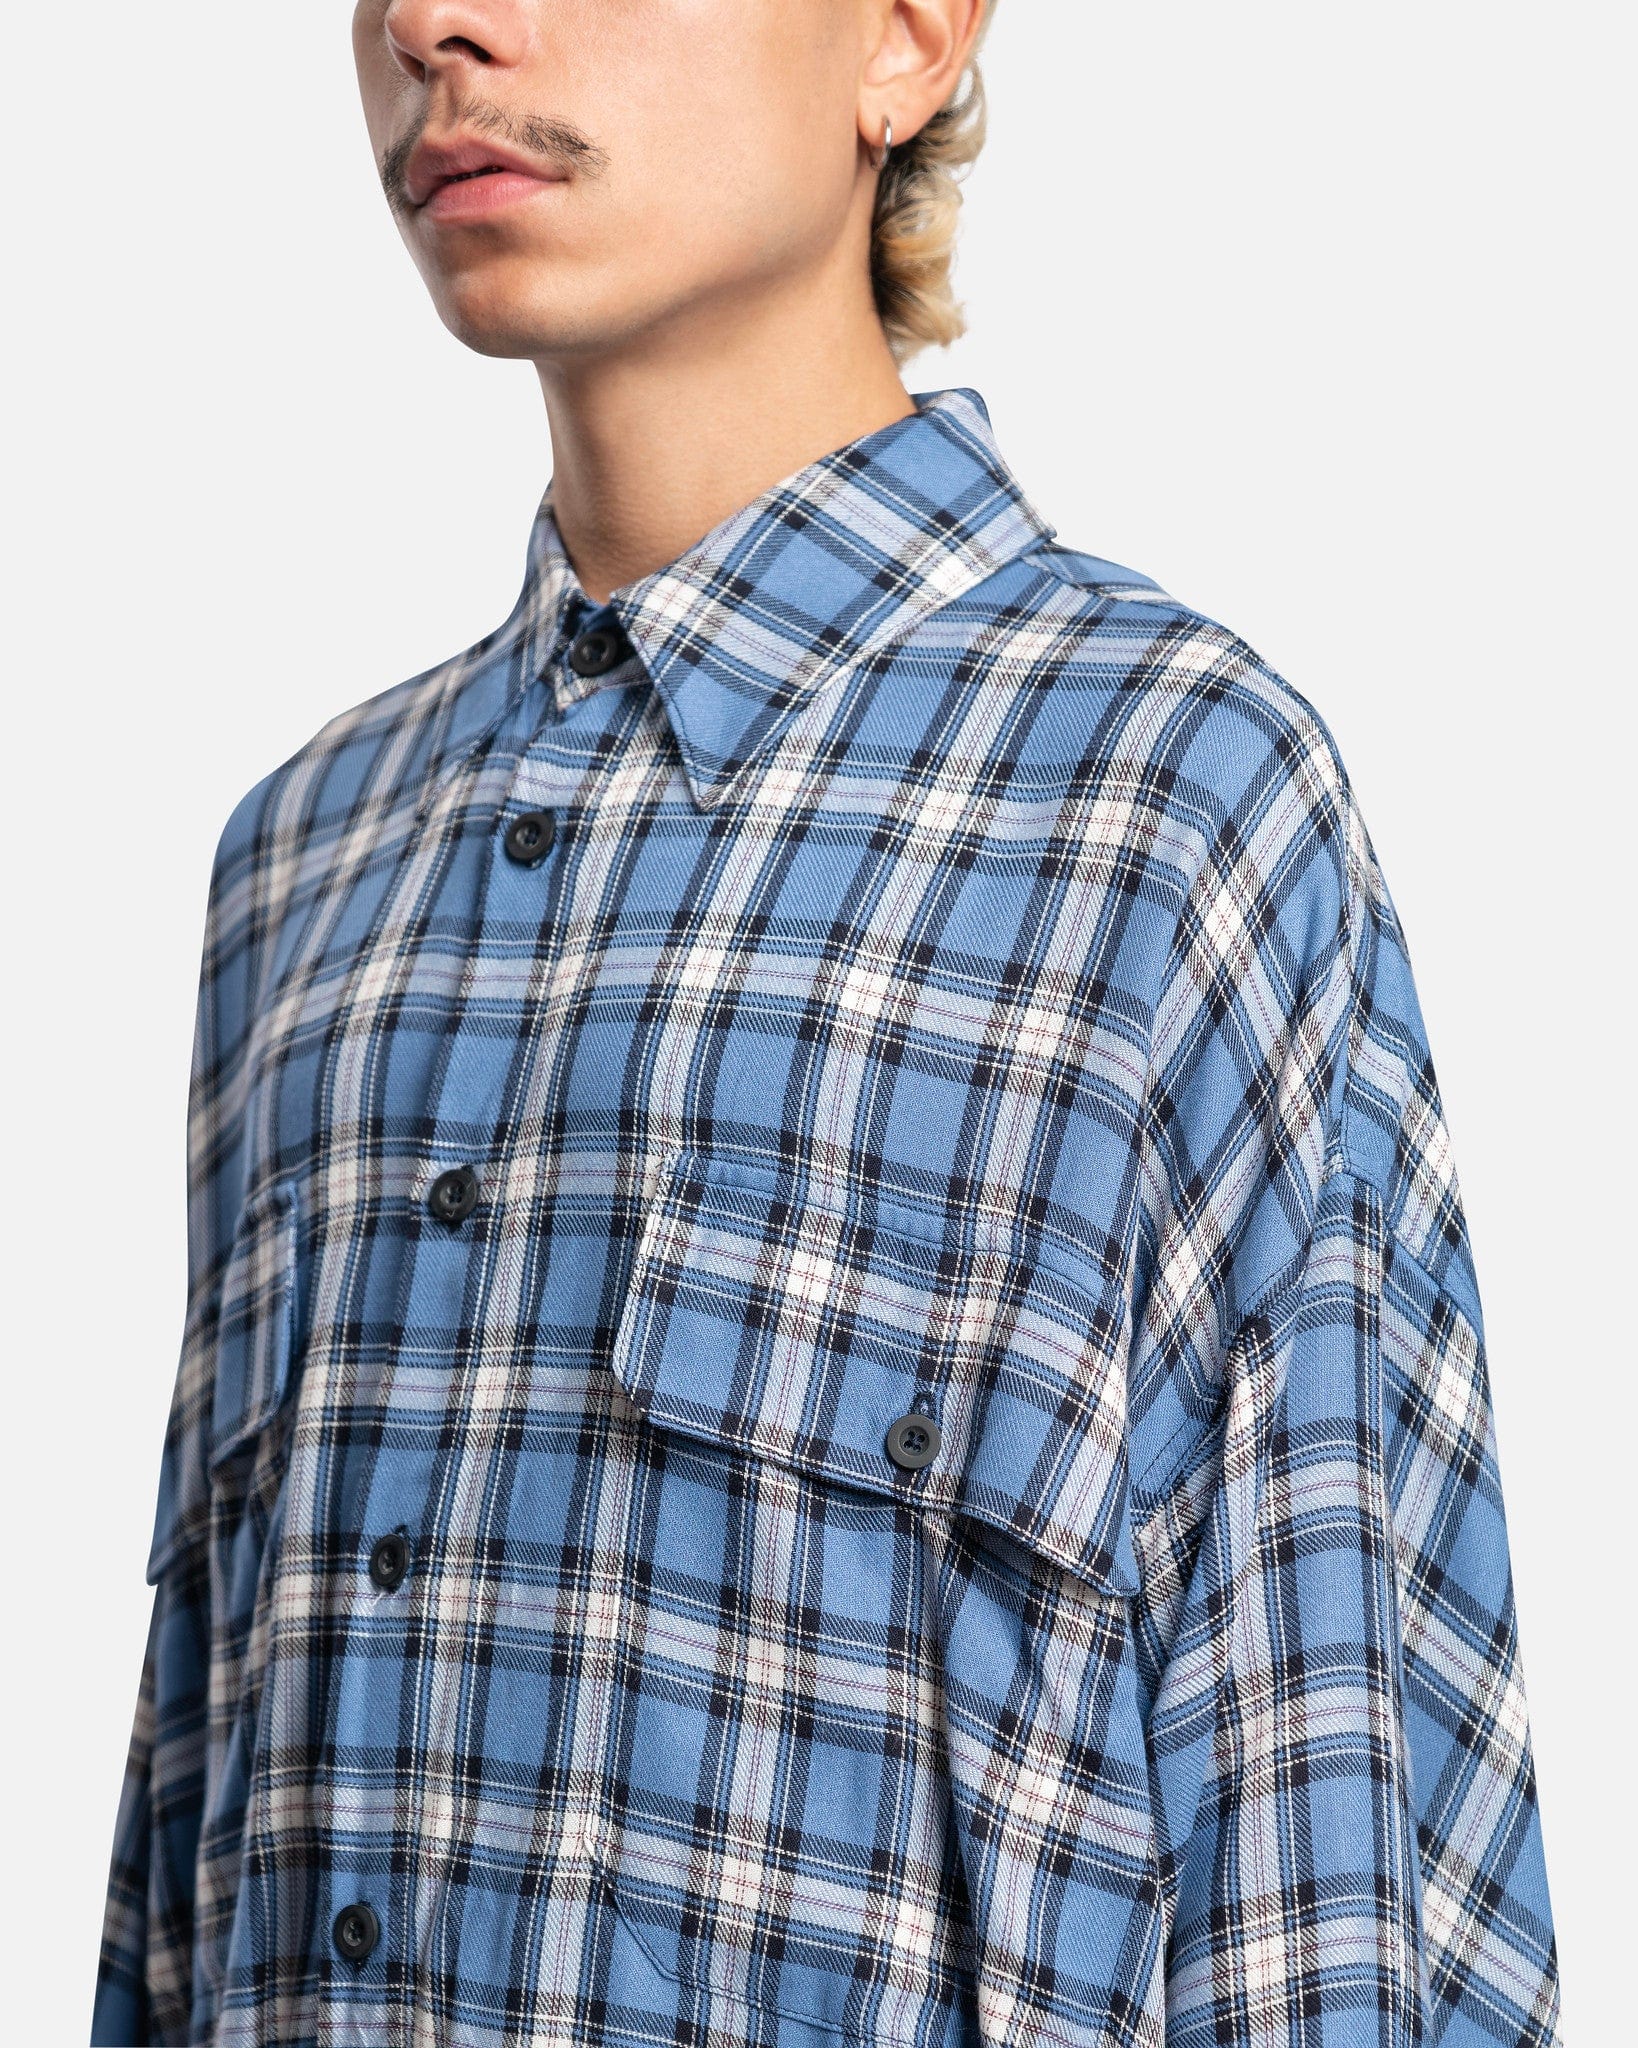 Willy Chavarria Men's Shirts Big Willy LS Shirt in Blue Plaid